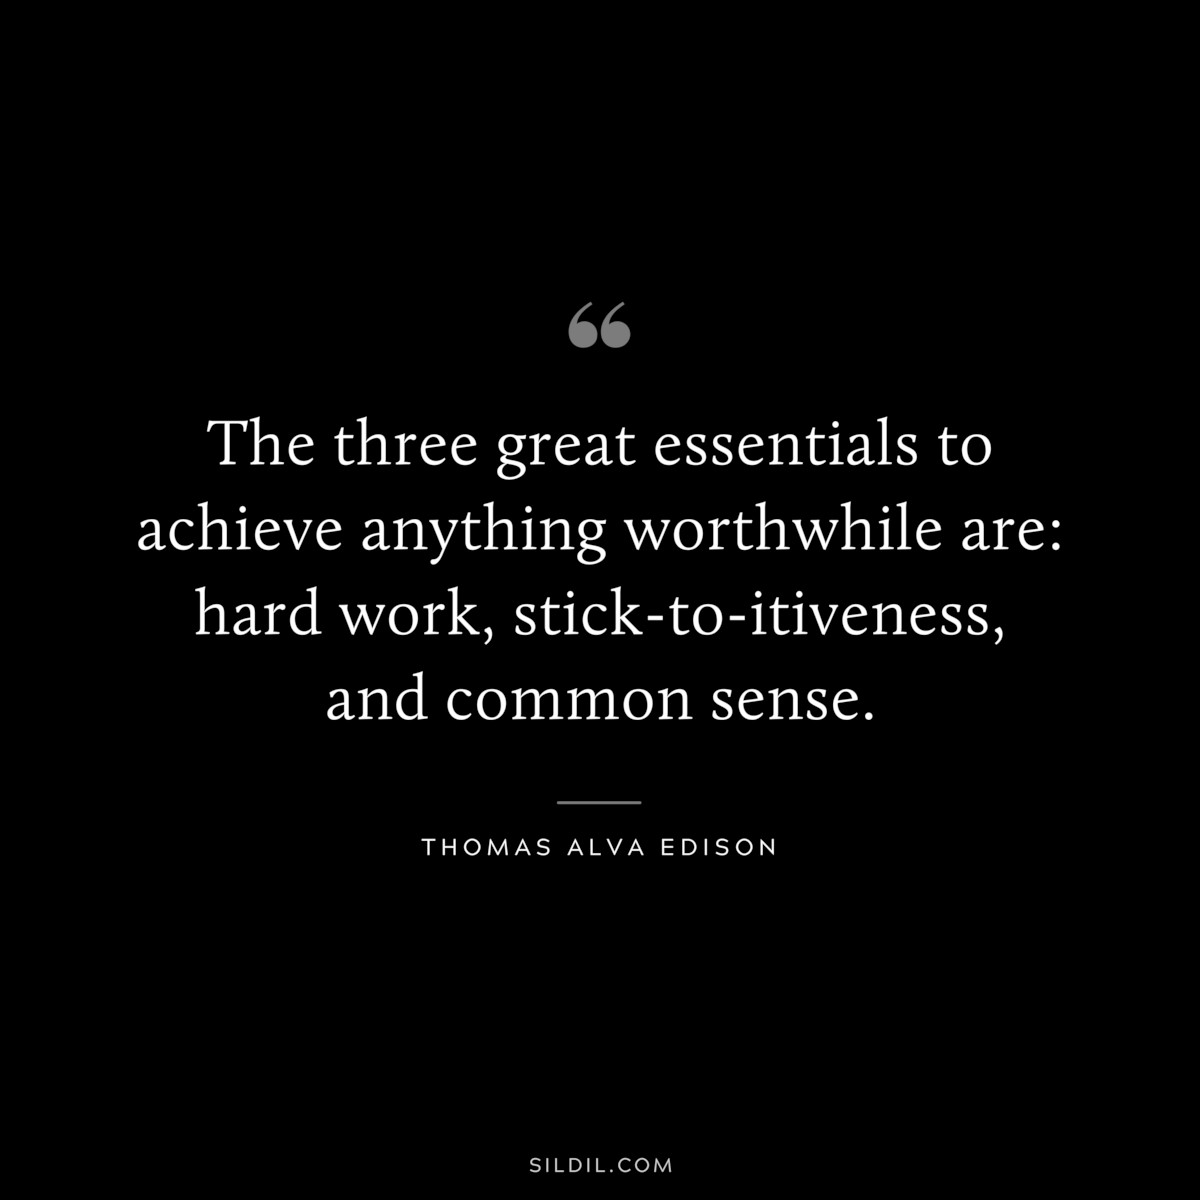 The three great essentials to achieve anything worthwhile are: hard work, stick-to-itiveness, and common sense. ― Thomas Alva Edison